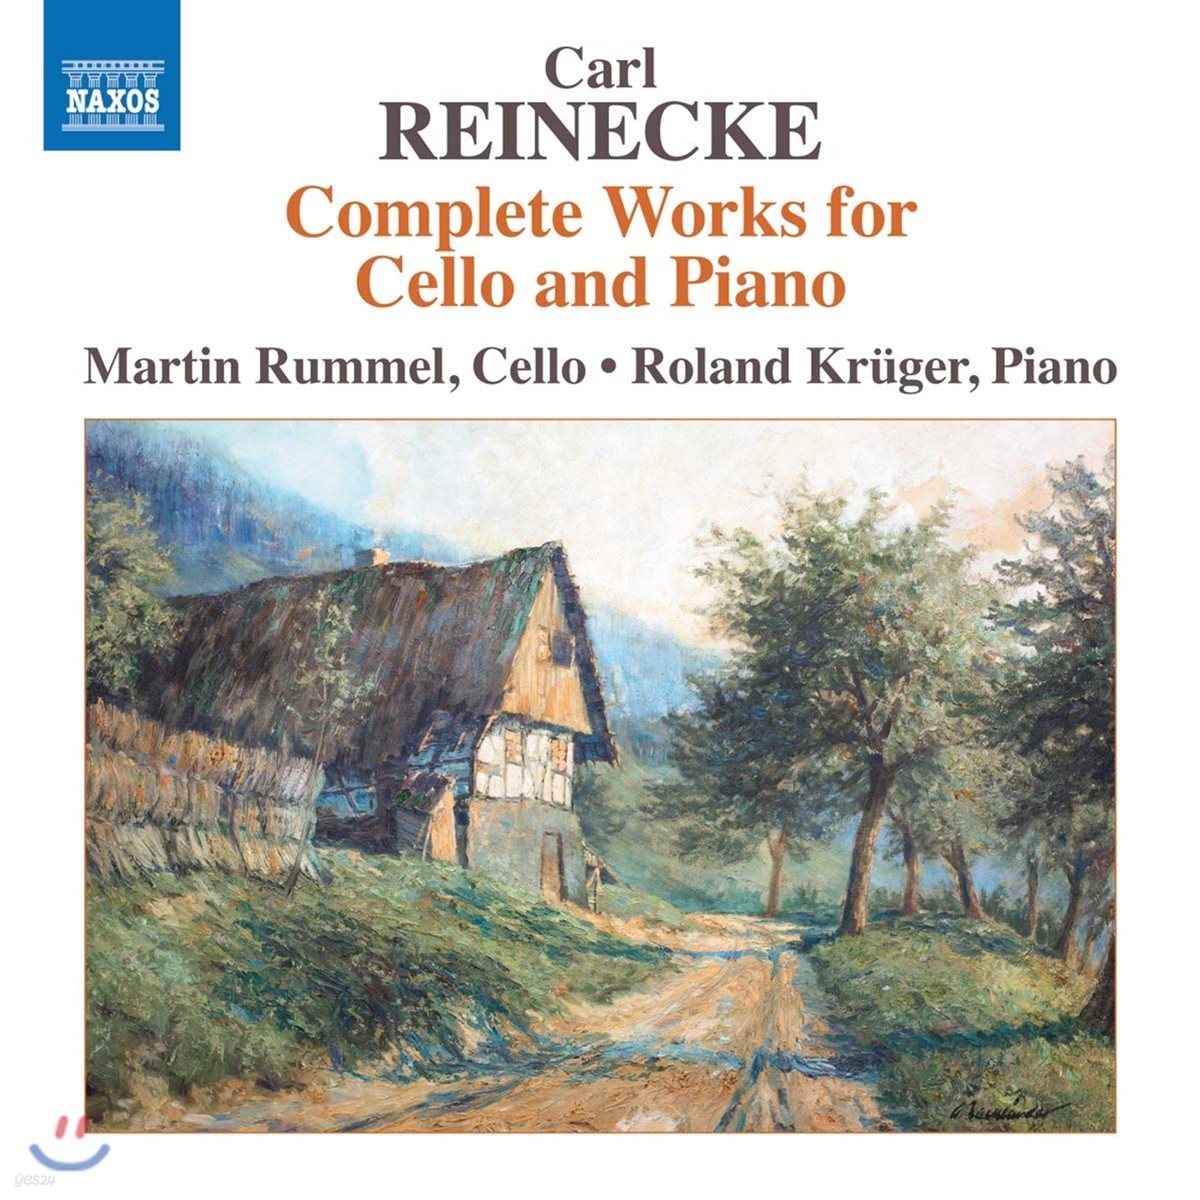 Martin Rummel / Roland Kruger 칼 라이네케: 첼로와 피아노를 위한 작품 전곡 (Carl Reinecke: Complete Works for Cello &amp; Piano)